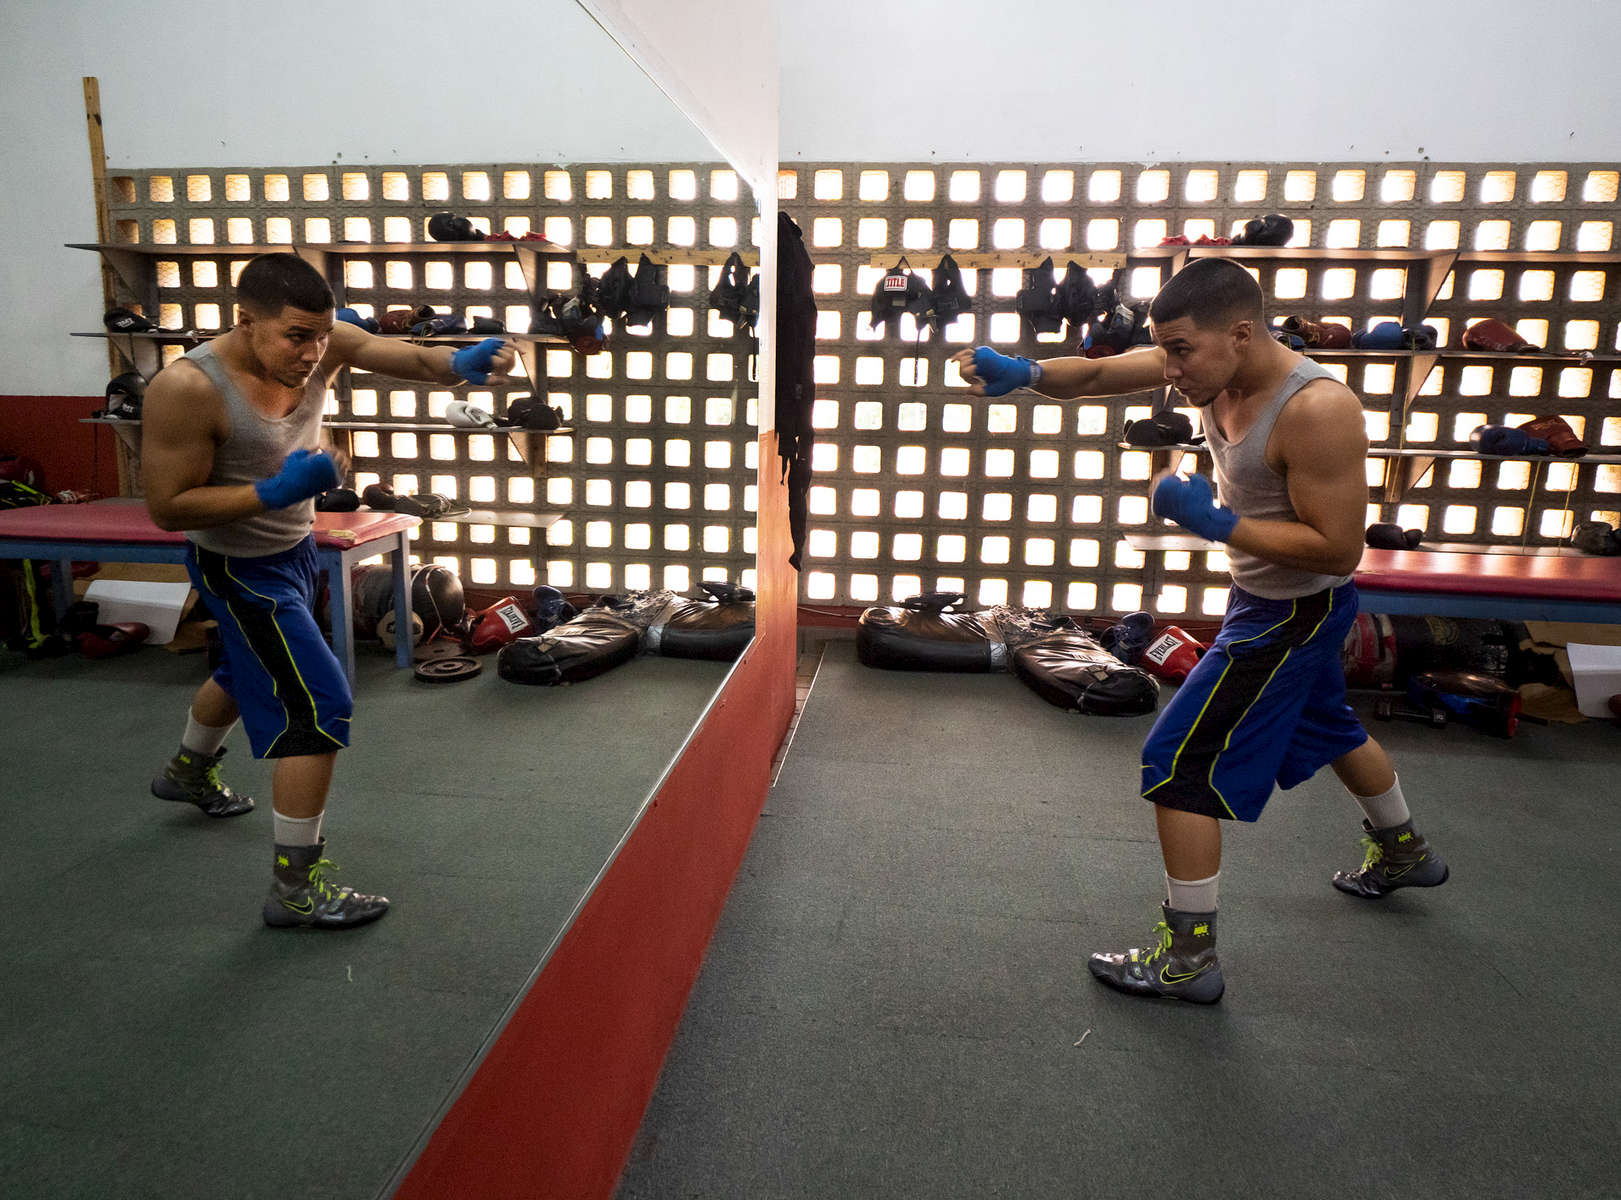 Professional Lightweight boxer Nestor Bravo with a record of 15-0 shadow boxes in front of the mirror in the boxing gym at the German Rieckehoff Sampayo Carolina Sports School on November 13, 2018 in Carolina, Puerto Rico. 